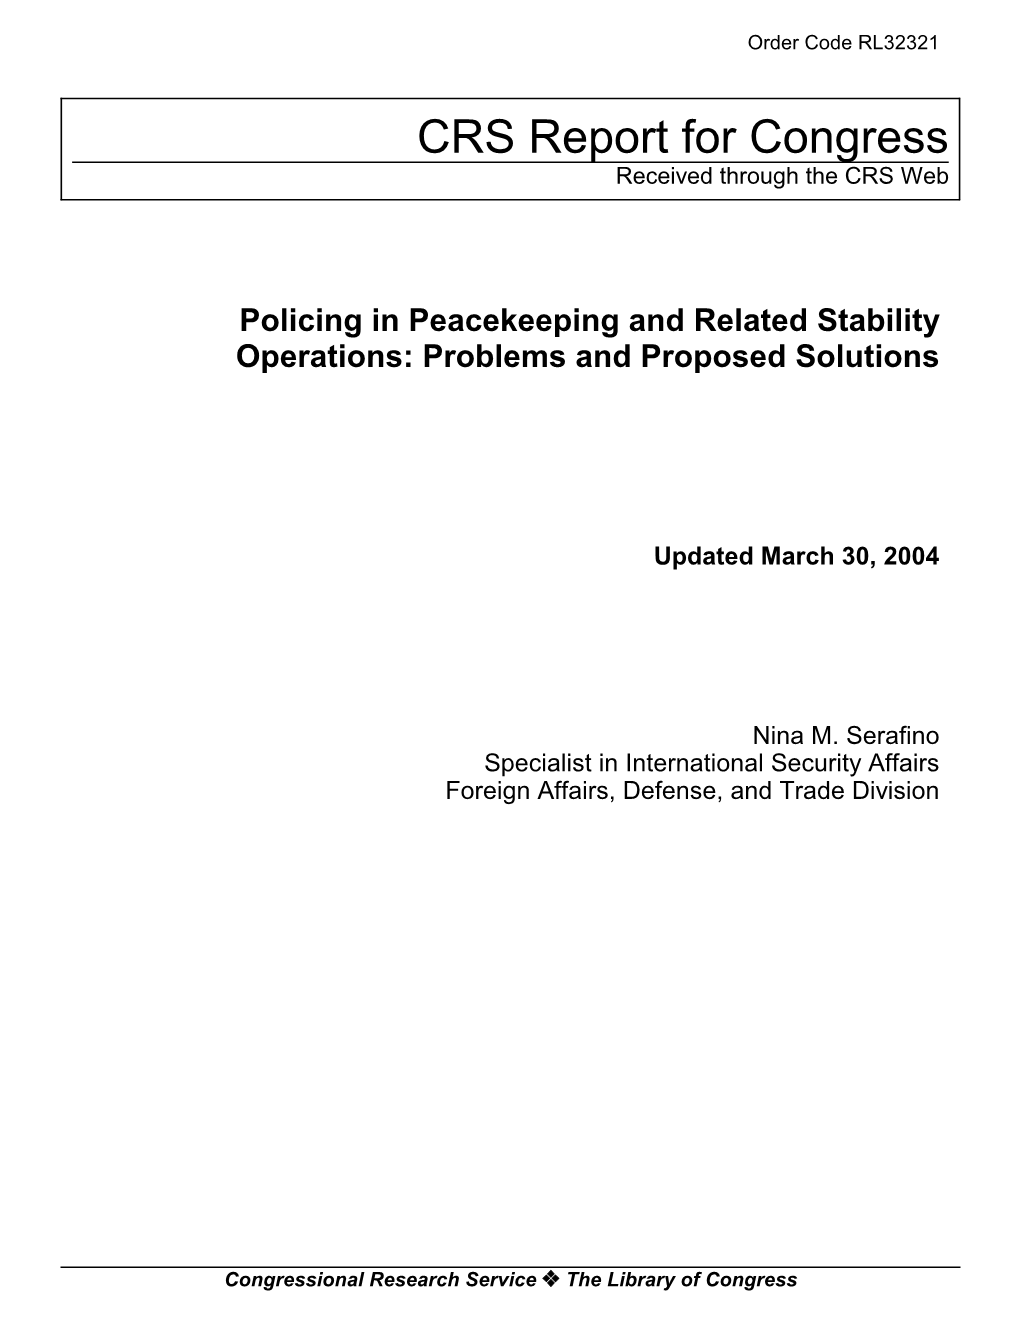 Policing in Peacekeeping and Related Stability Operations: Problems and Proposed Solutions